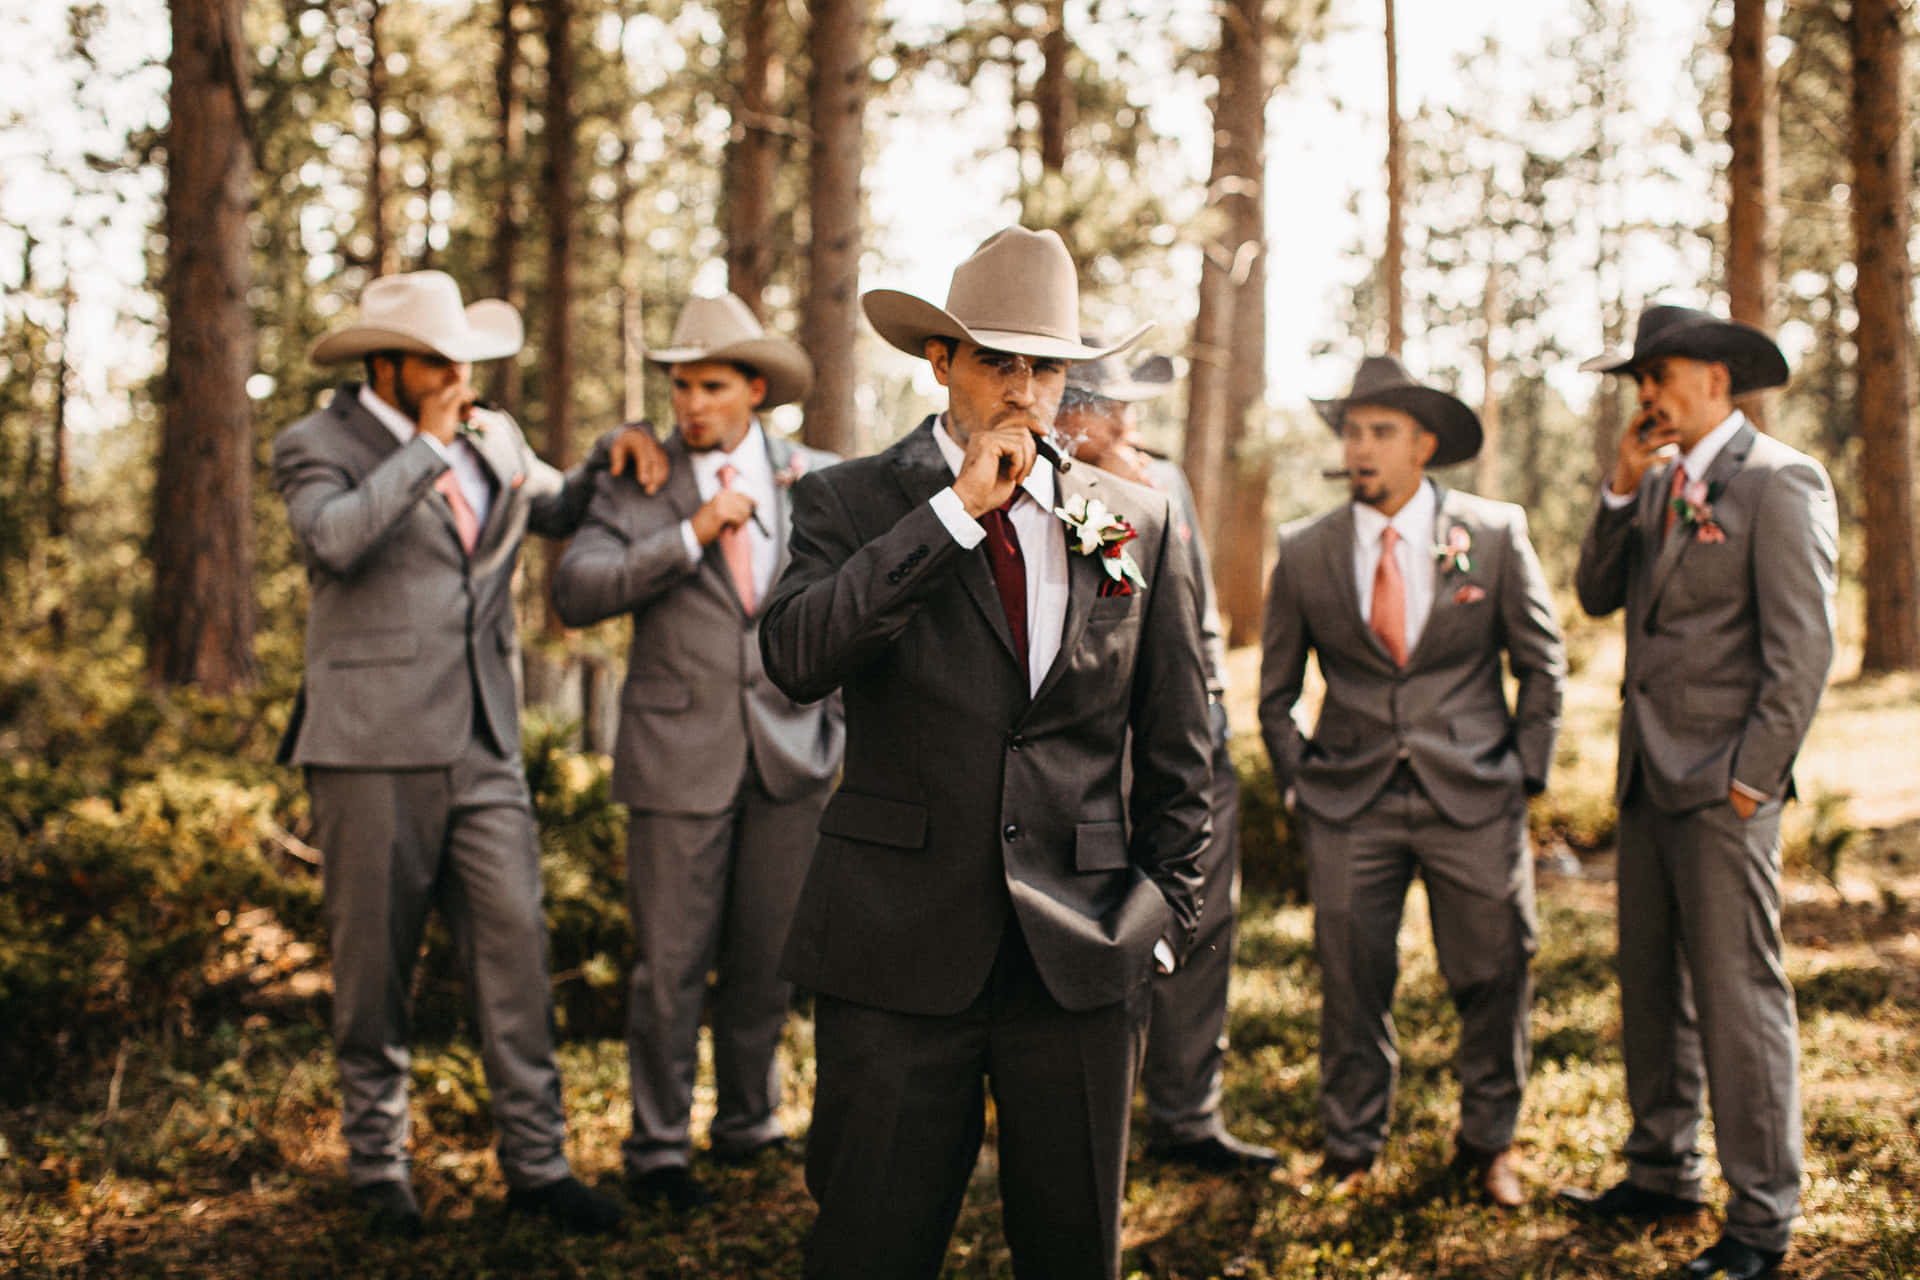 "Family First - A Groomsman, Groom and Father of the Groom Pose for a Loving Moment"